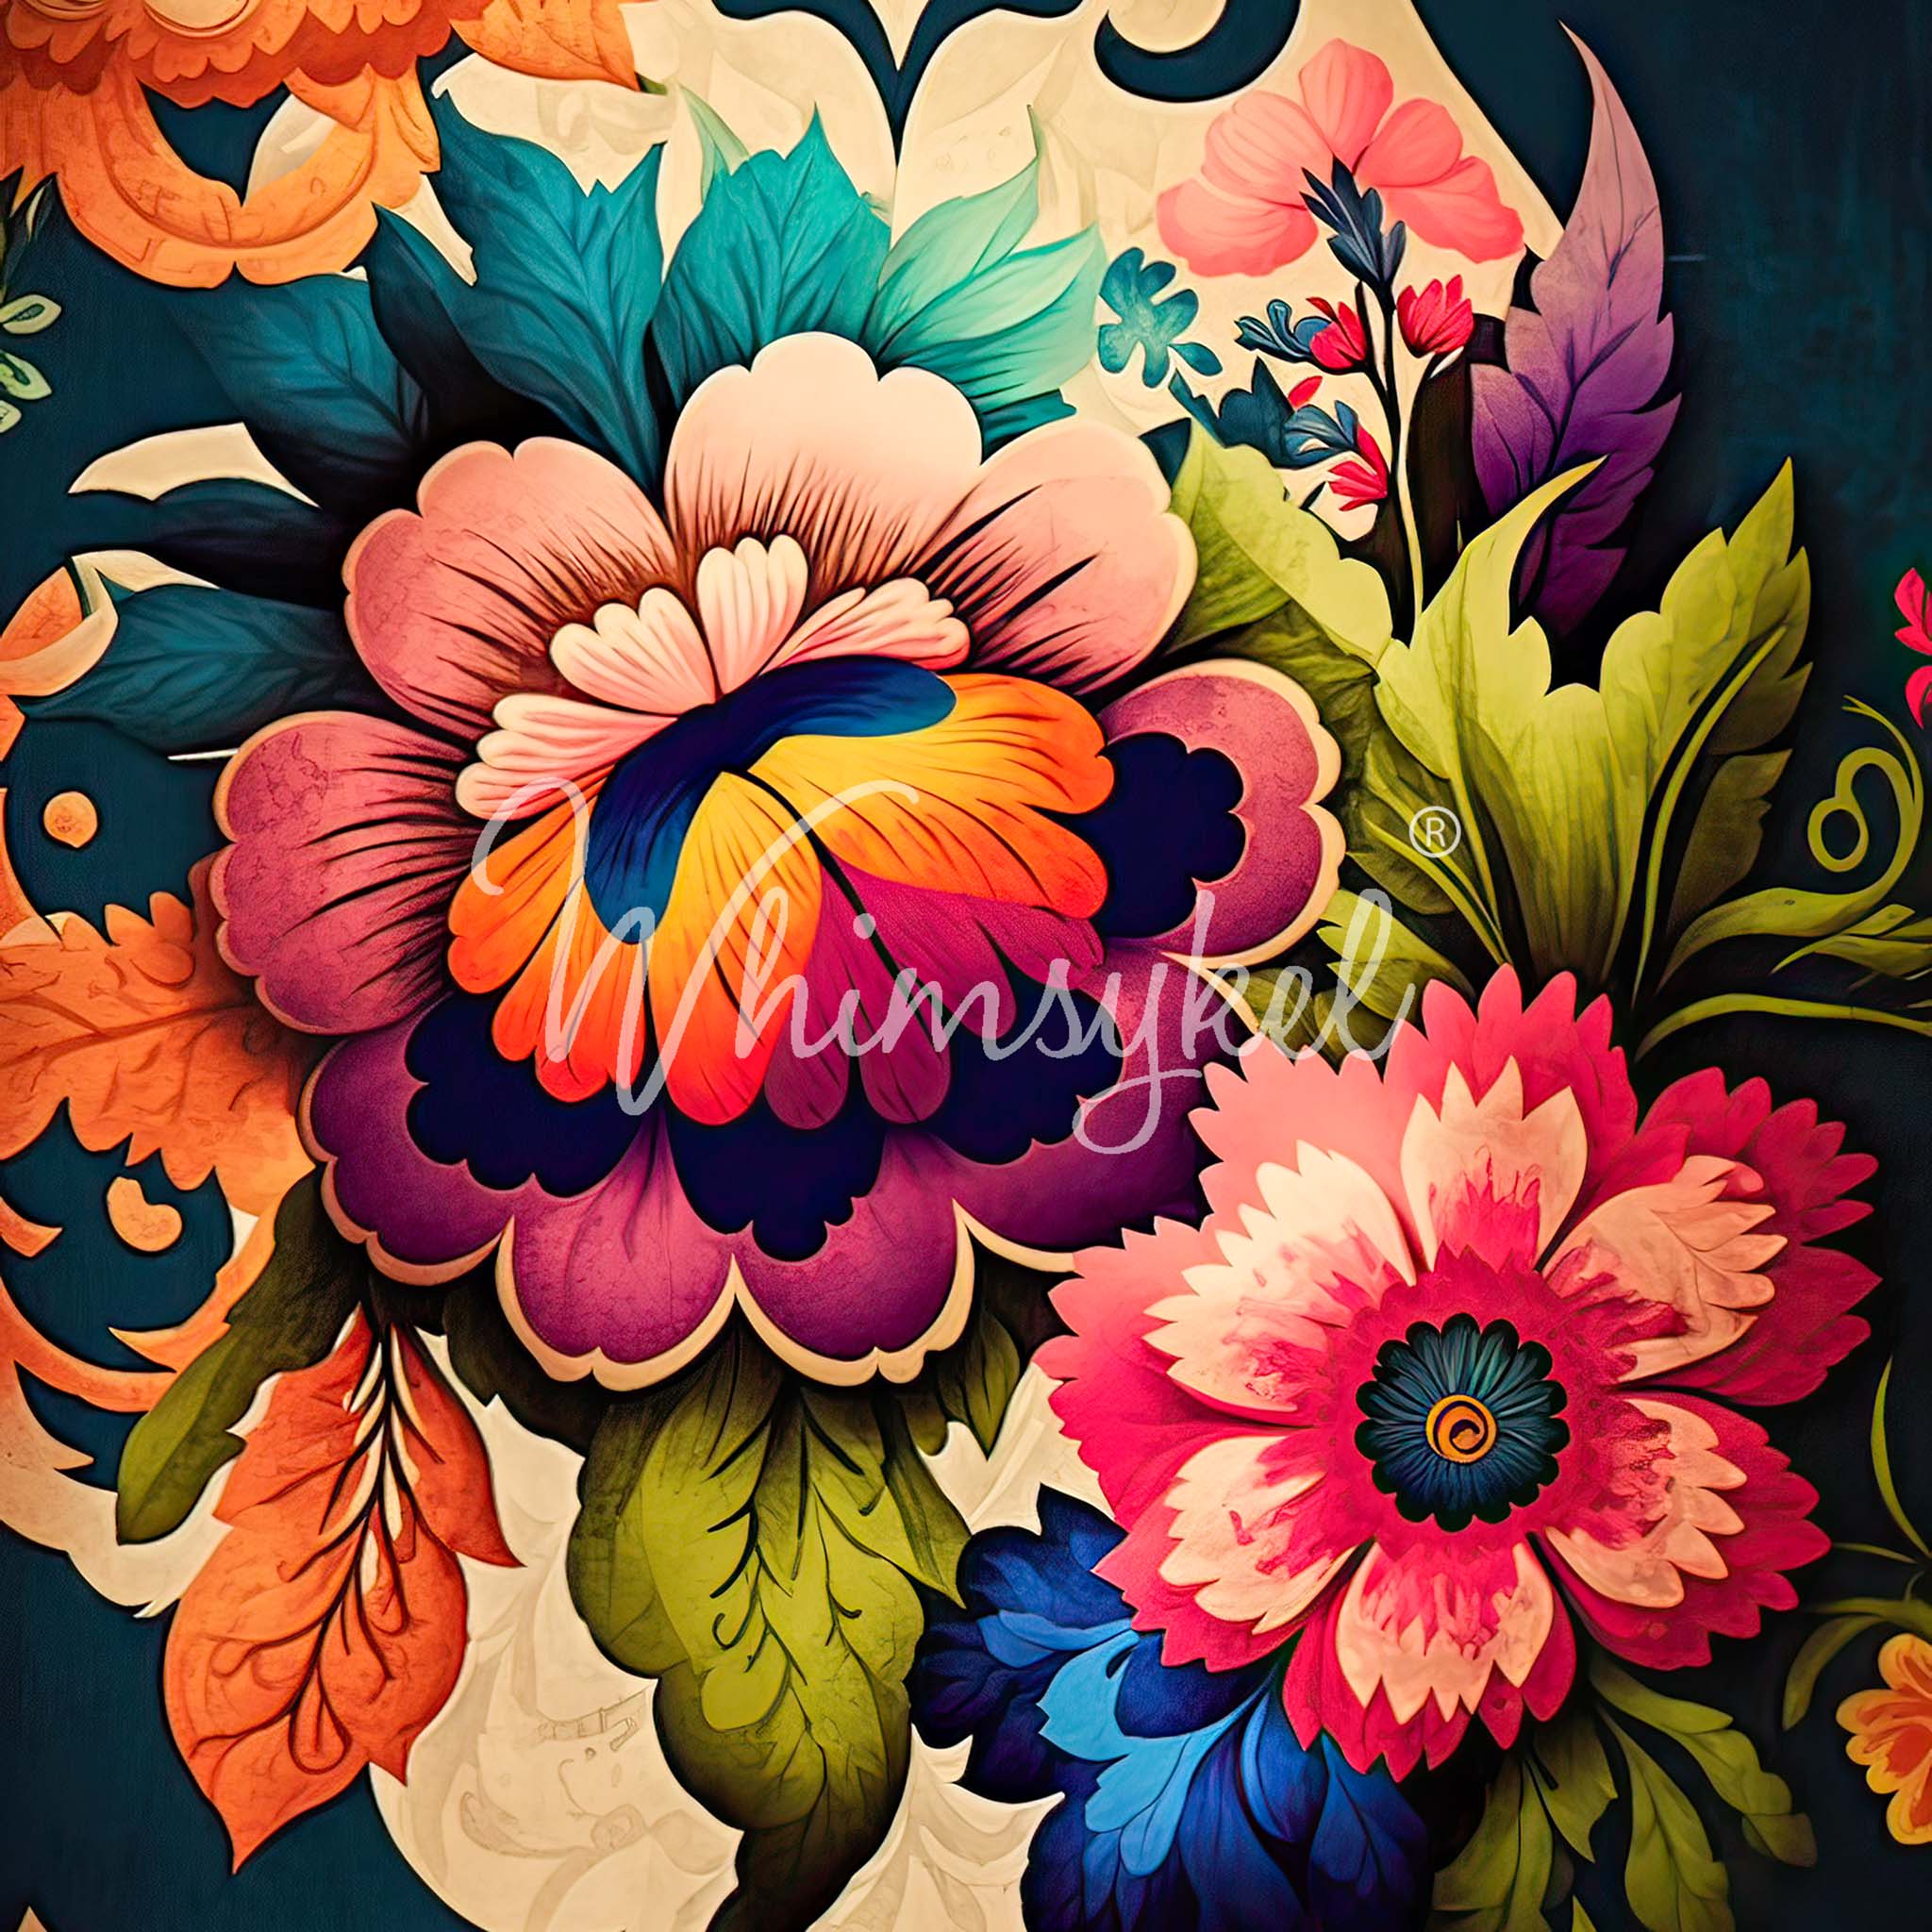 A close-up of a tissue paper design that features a colorful and vibrant representation of boho-inspired flowers that exude a playful and cheerful vibe.